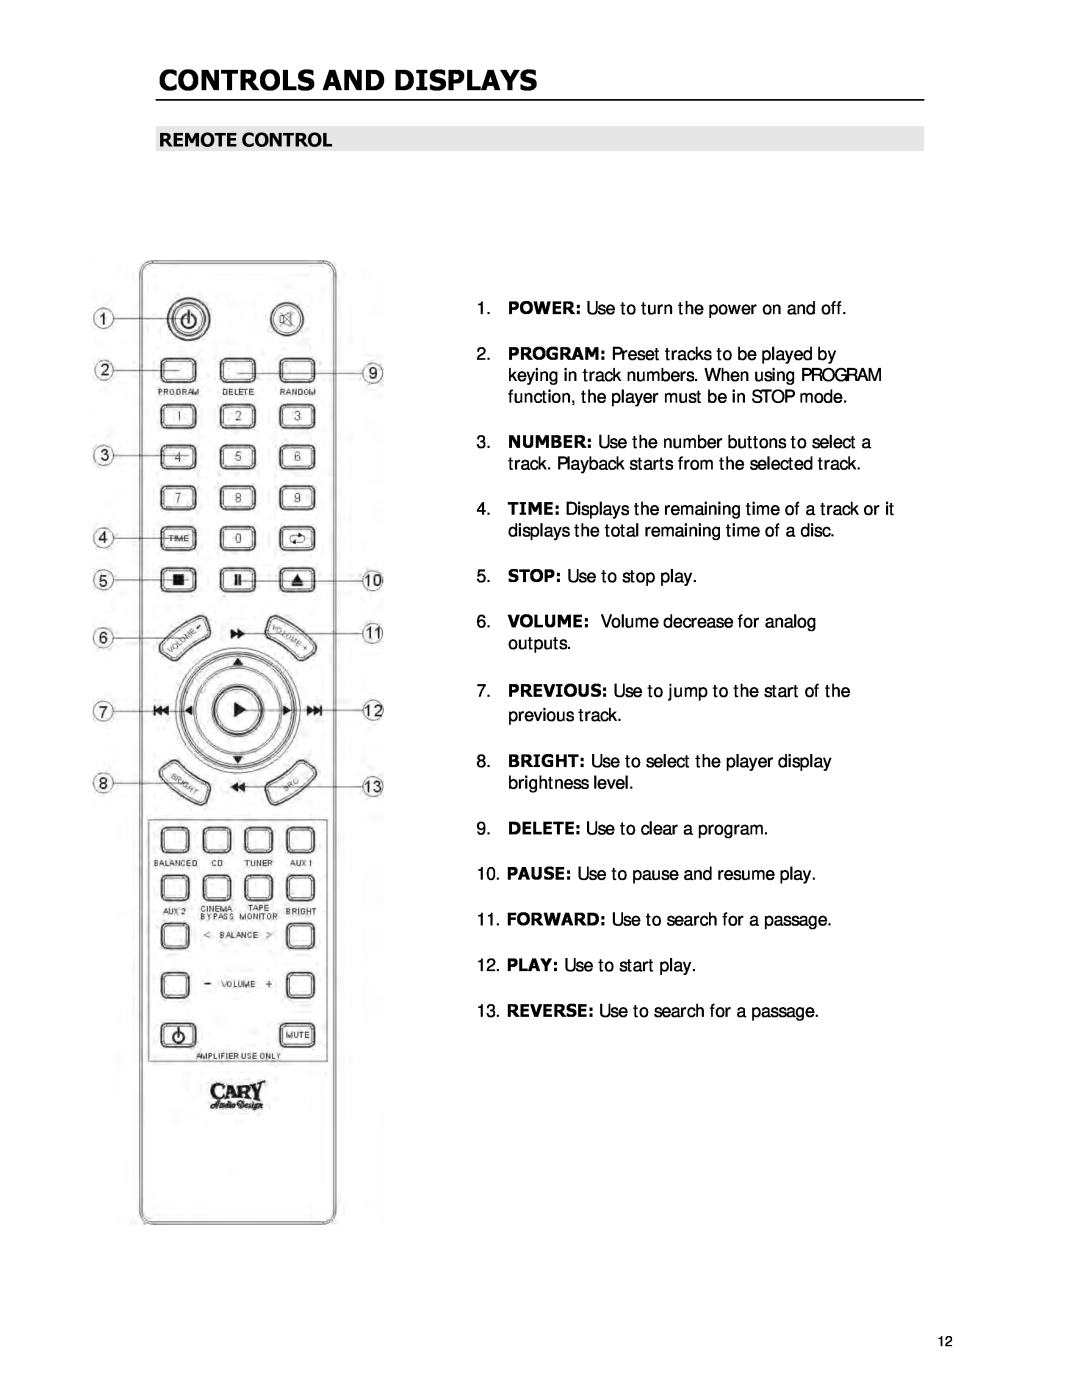 Cary Audio Design CD-500 owner manual Controls And Displays, Remote Control 